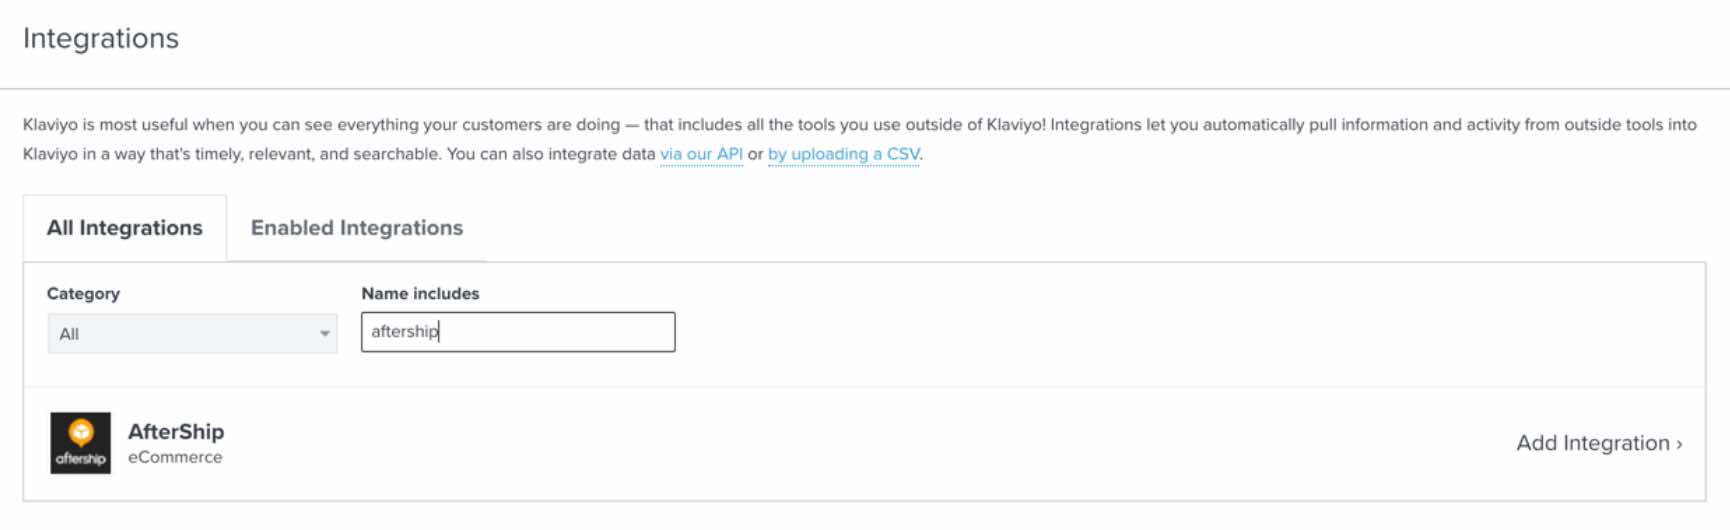 All Integrations tab in Klaviyo with AfterShip in searchbar and AfterShip card in results